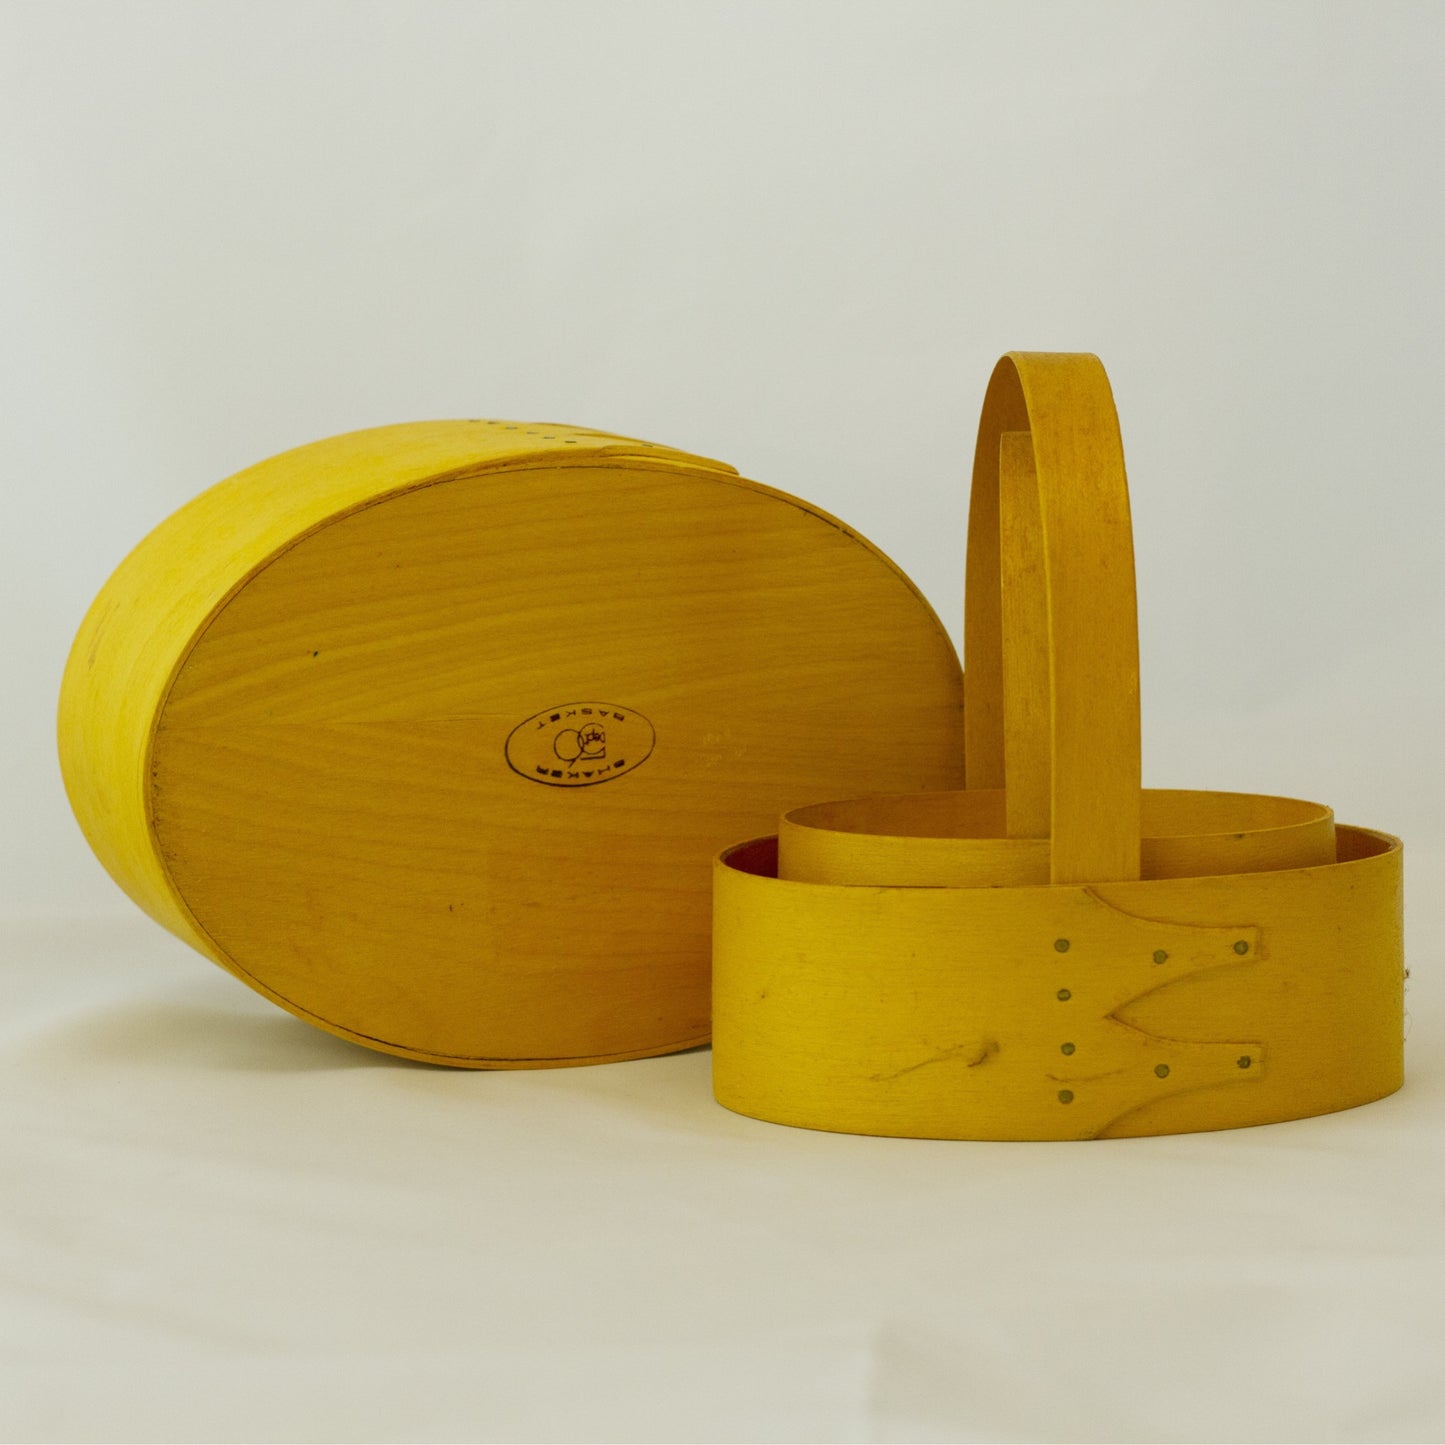 SHAKER-STYLE SWALLOW TAIL JOINTED Yellow Oval Nesting Carrier Baskets (Set of 3)